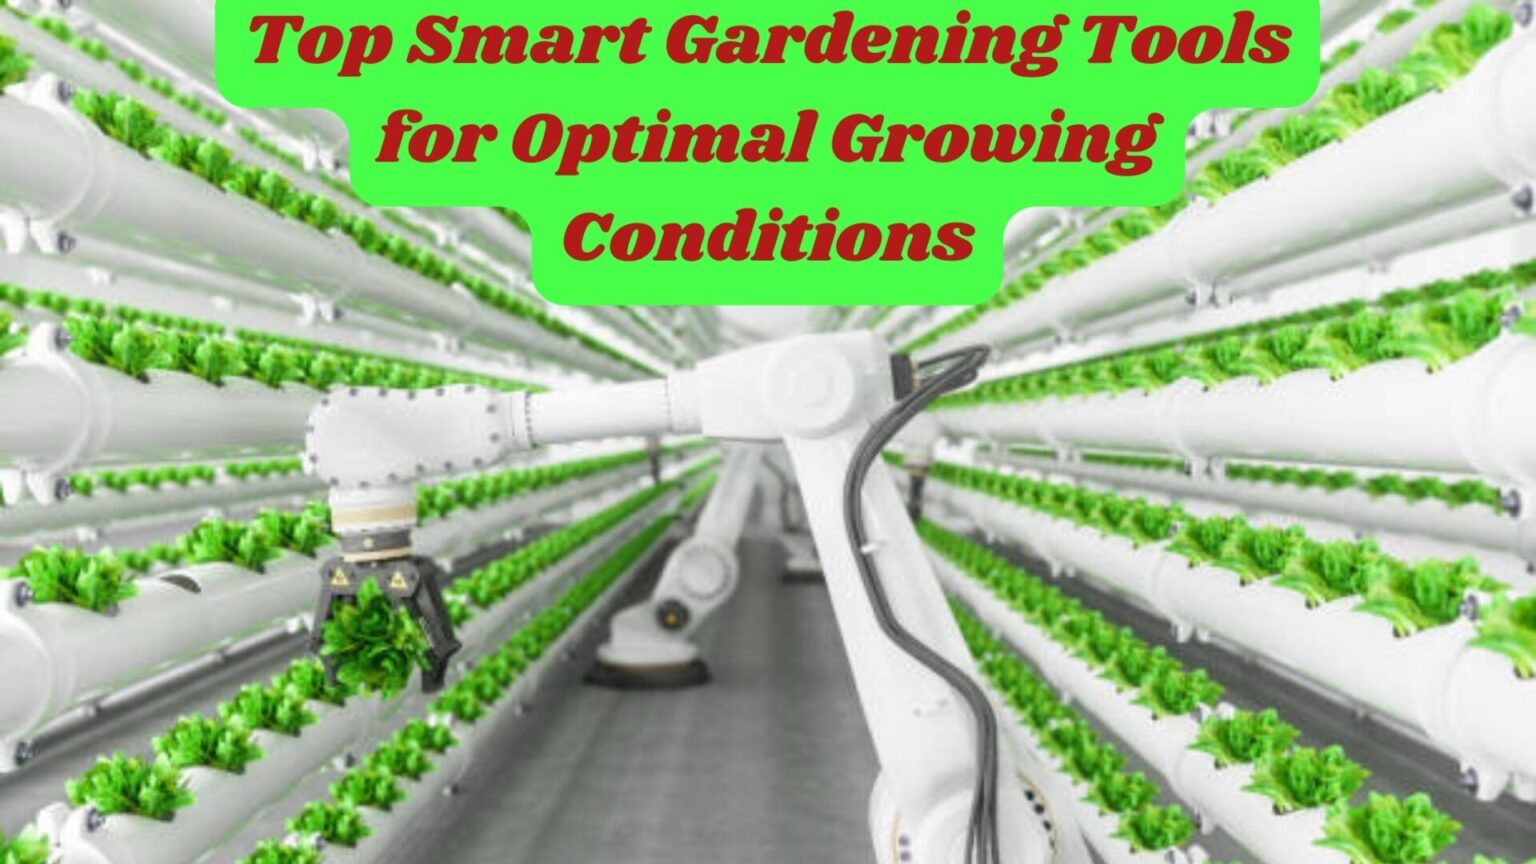 Top Smart Gardening Tools for Optimal Growing Conditions